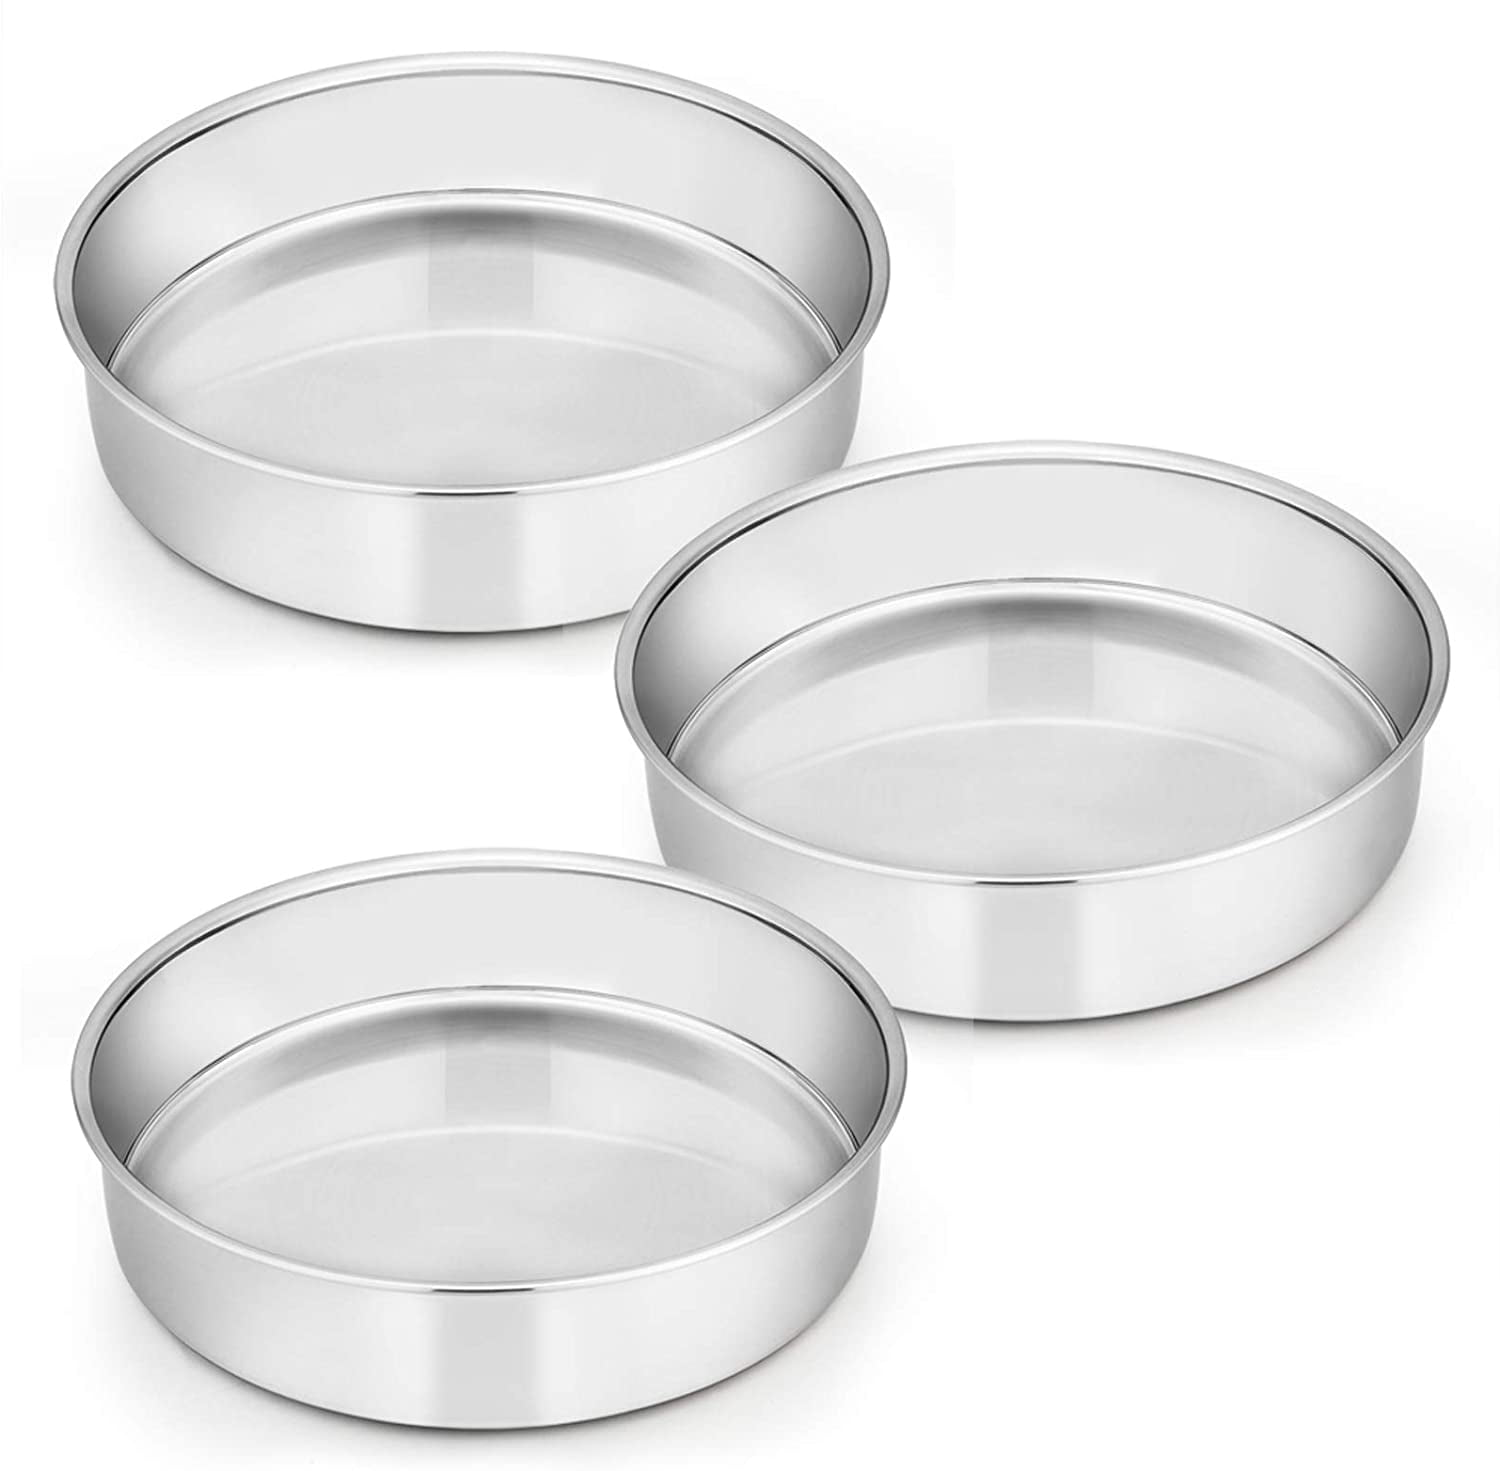 Durable Stainless Steel Non-stick Round Cake Mold Baking Pan Pudding Tray Supply 